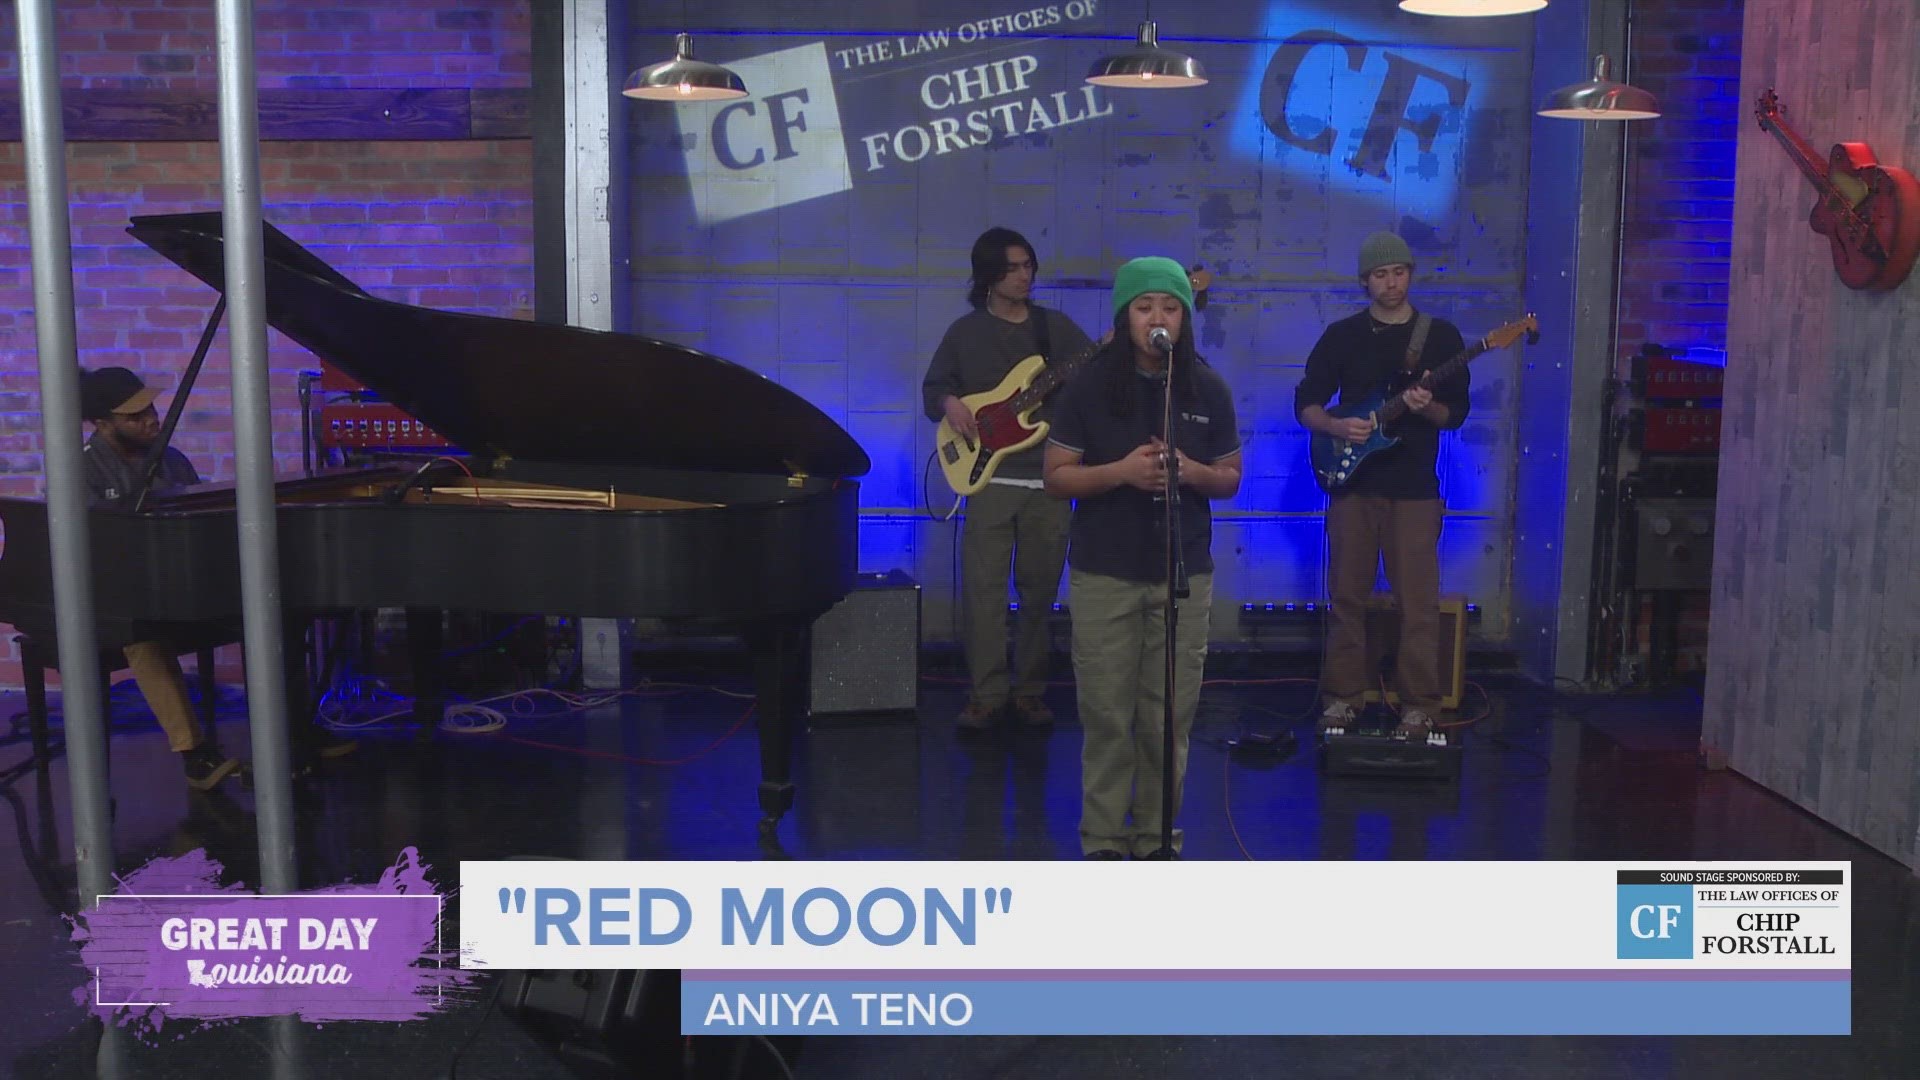 We enjoy another song from the talented Aniya Teno and meet her band.